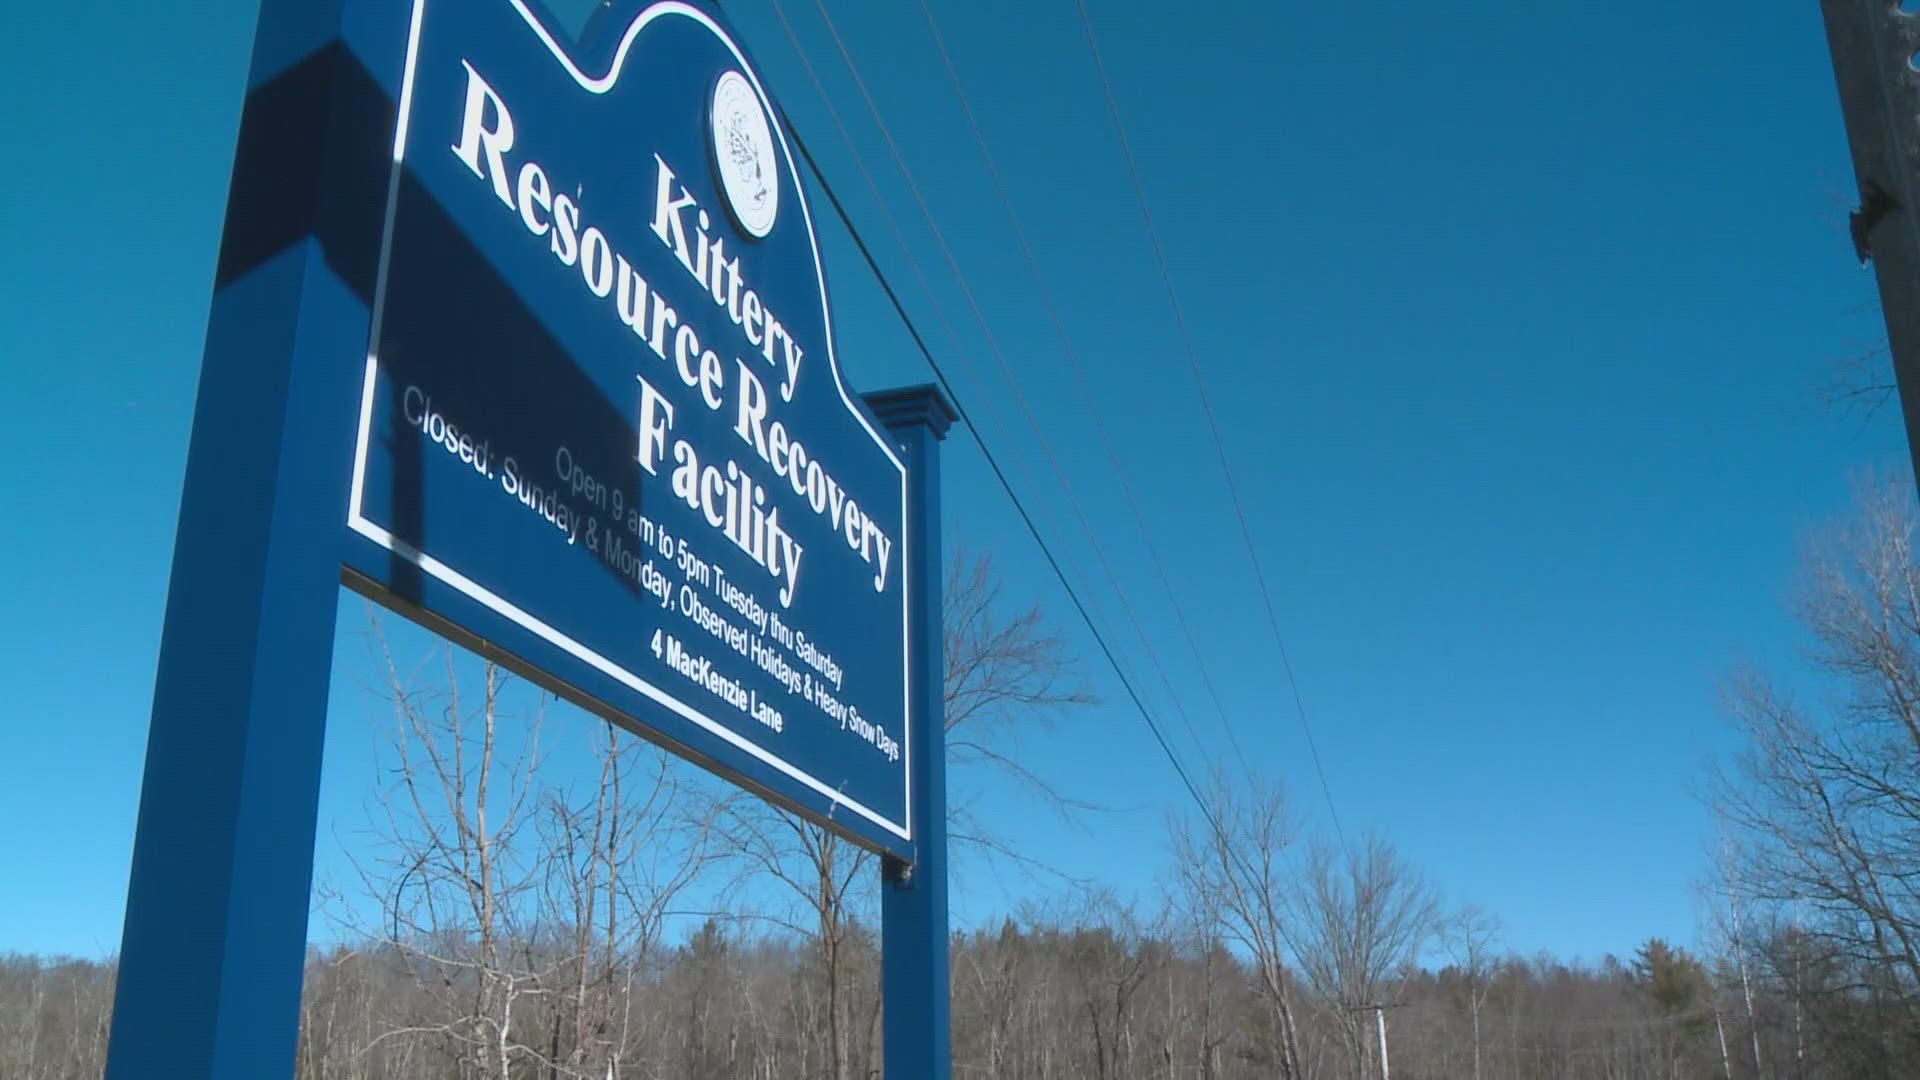 This comes after high levels of the toxic chemicals were found near the Kittery town dump.